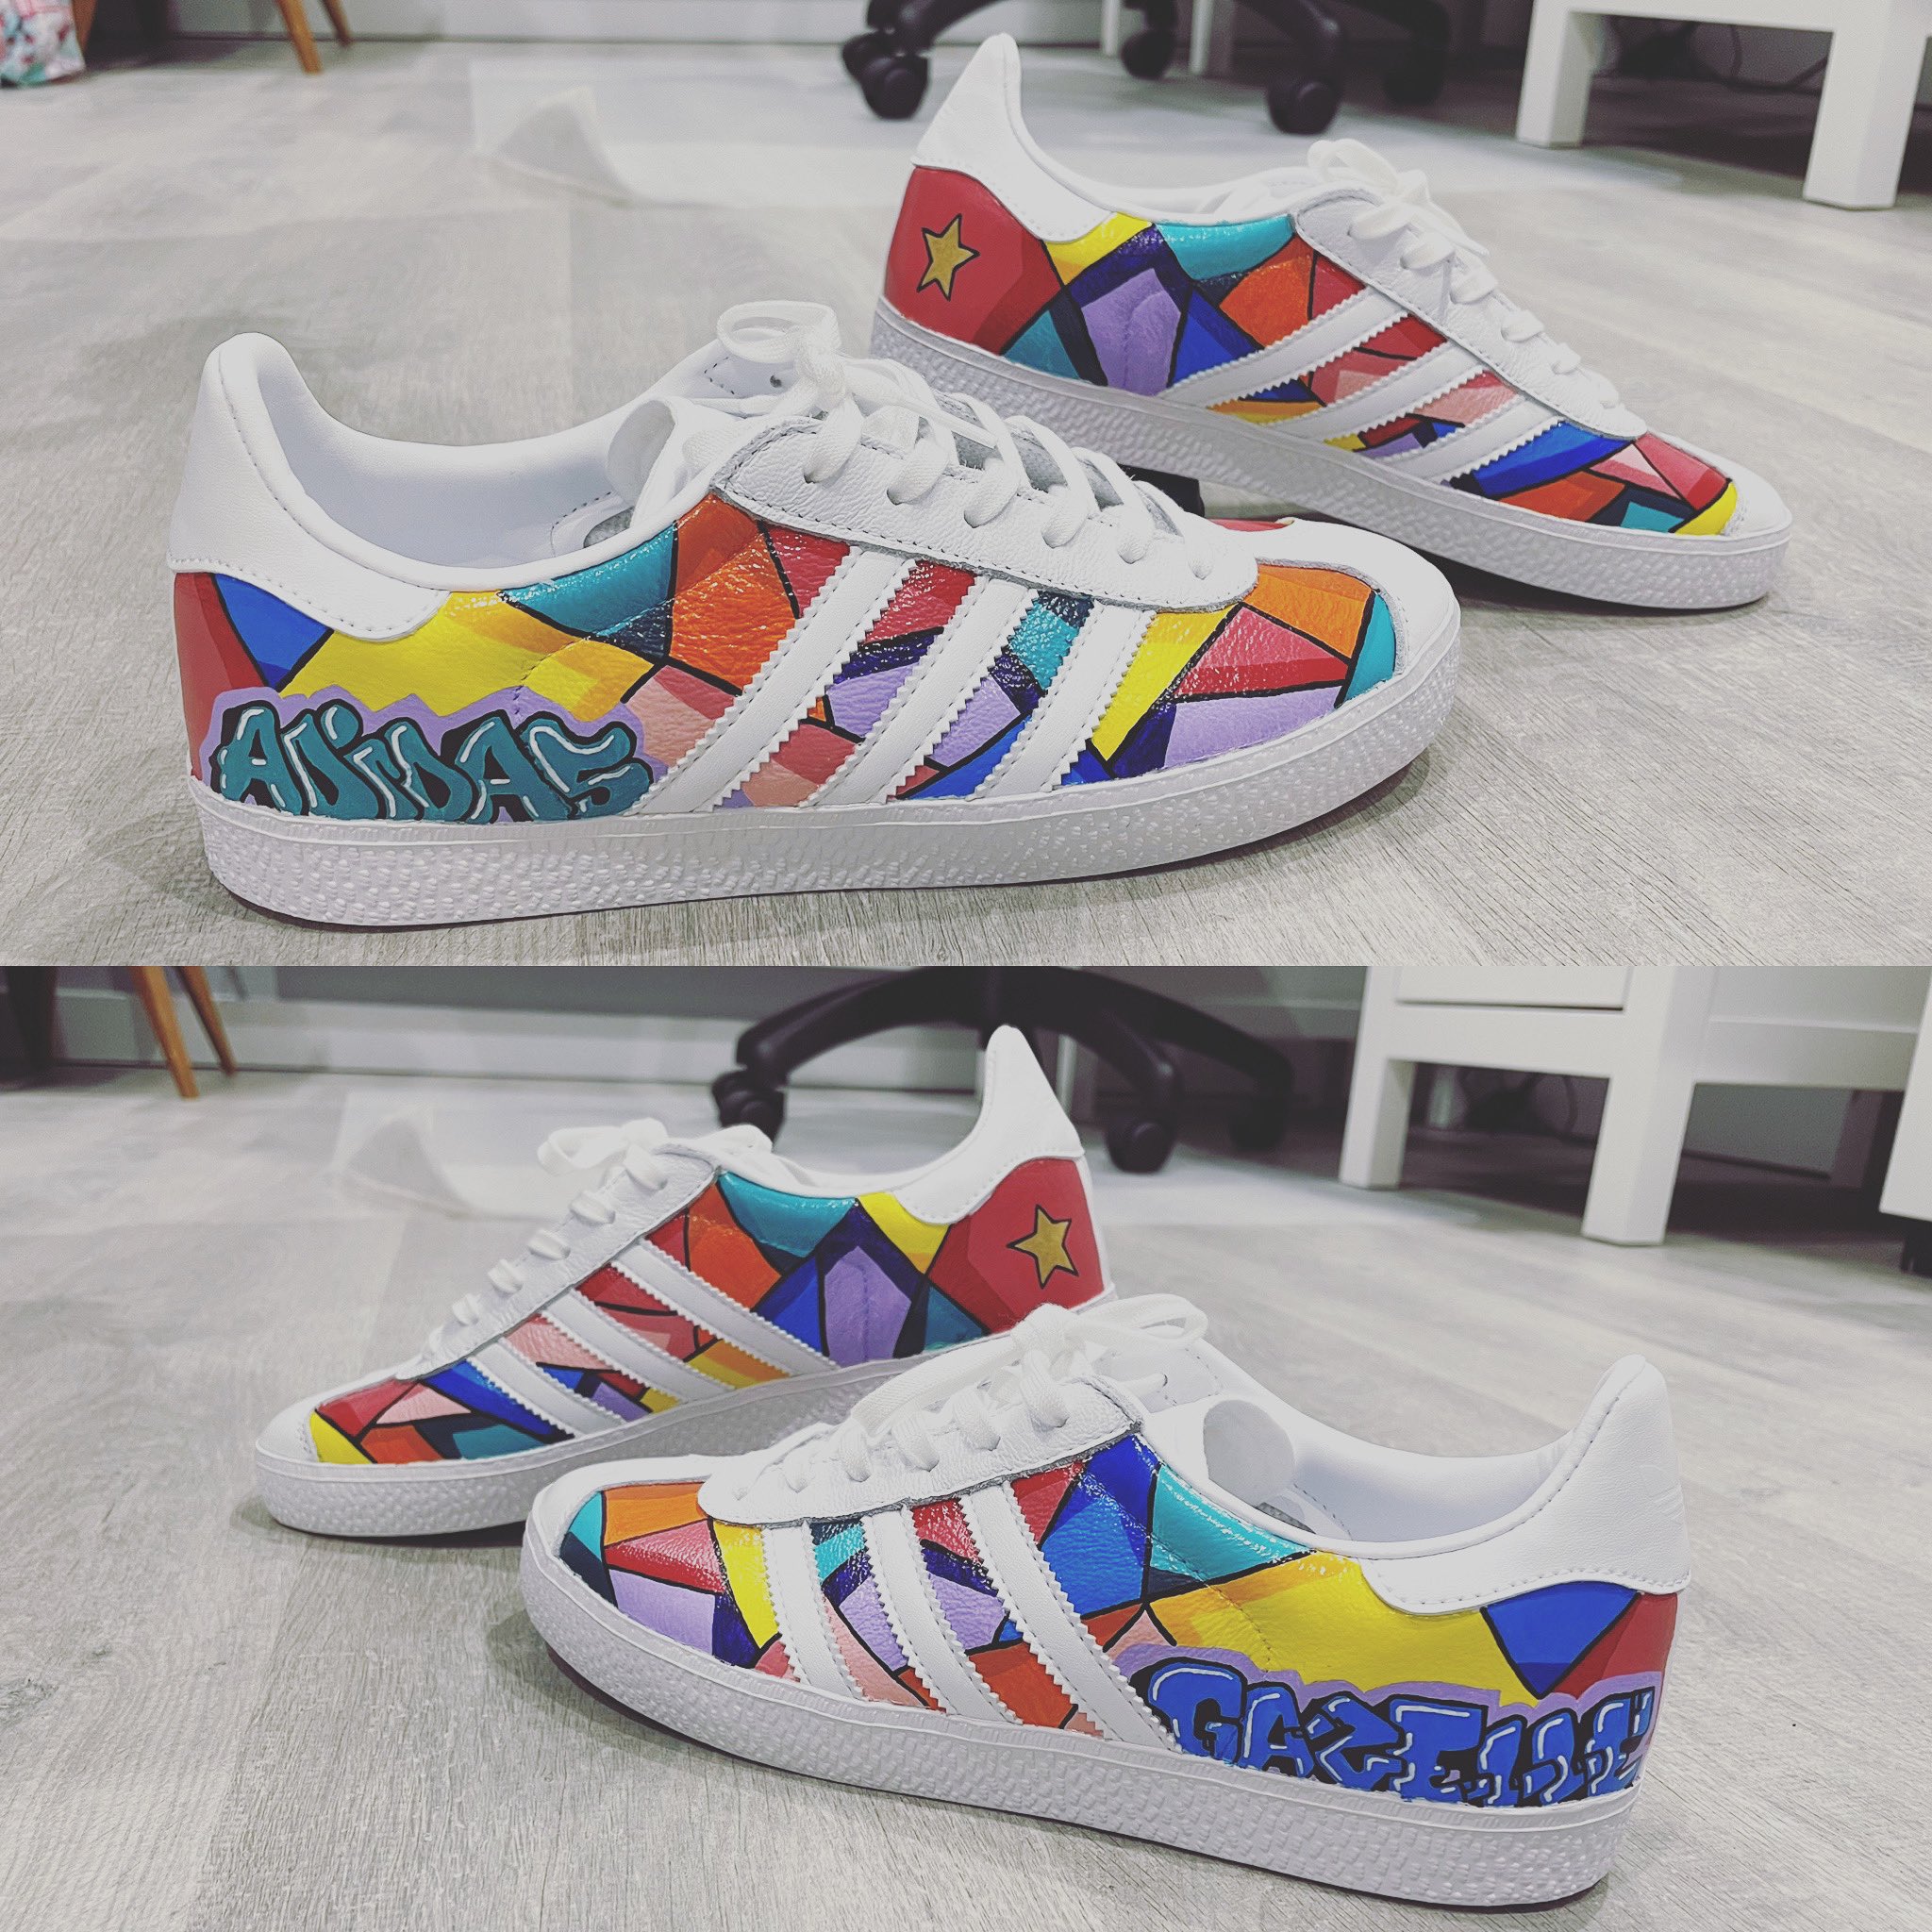 hannah vaughan™ on Twitter: "Custom painted gazelles and ready to wear 😎🤓 #customsneakers #adidas #gazelle #angulespaint https://t.co/OC0FcrC267" / Twitter